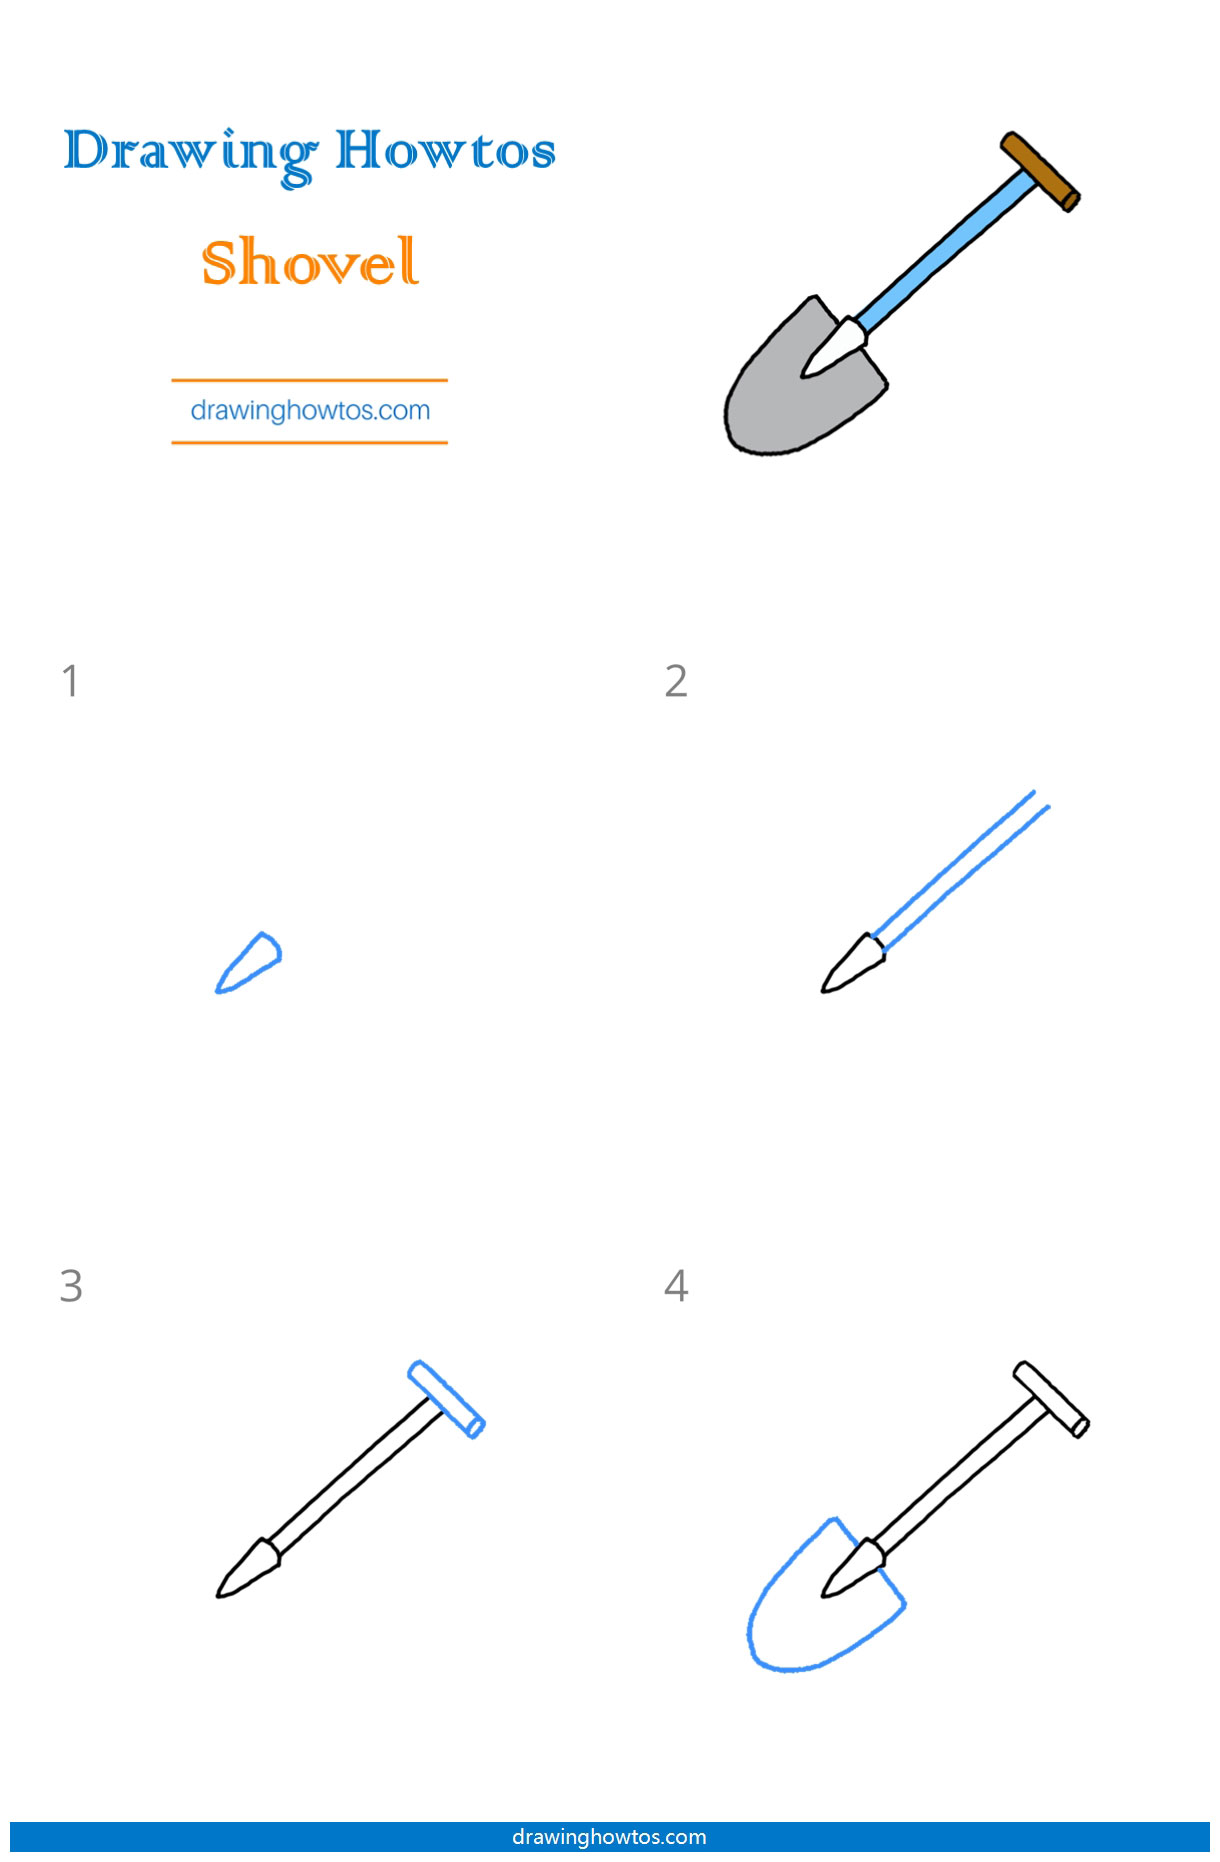 How to Draw a Shovel Step by Step Easy Drawing Guides Drawing Howtos